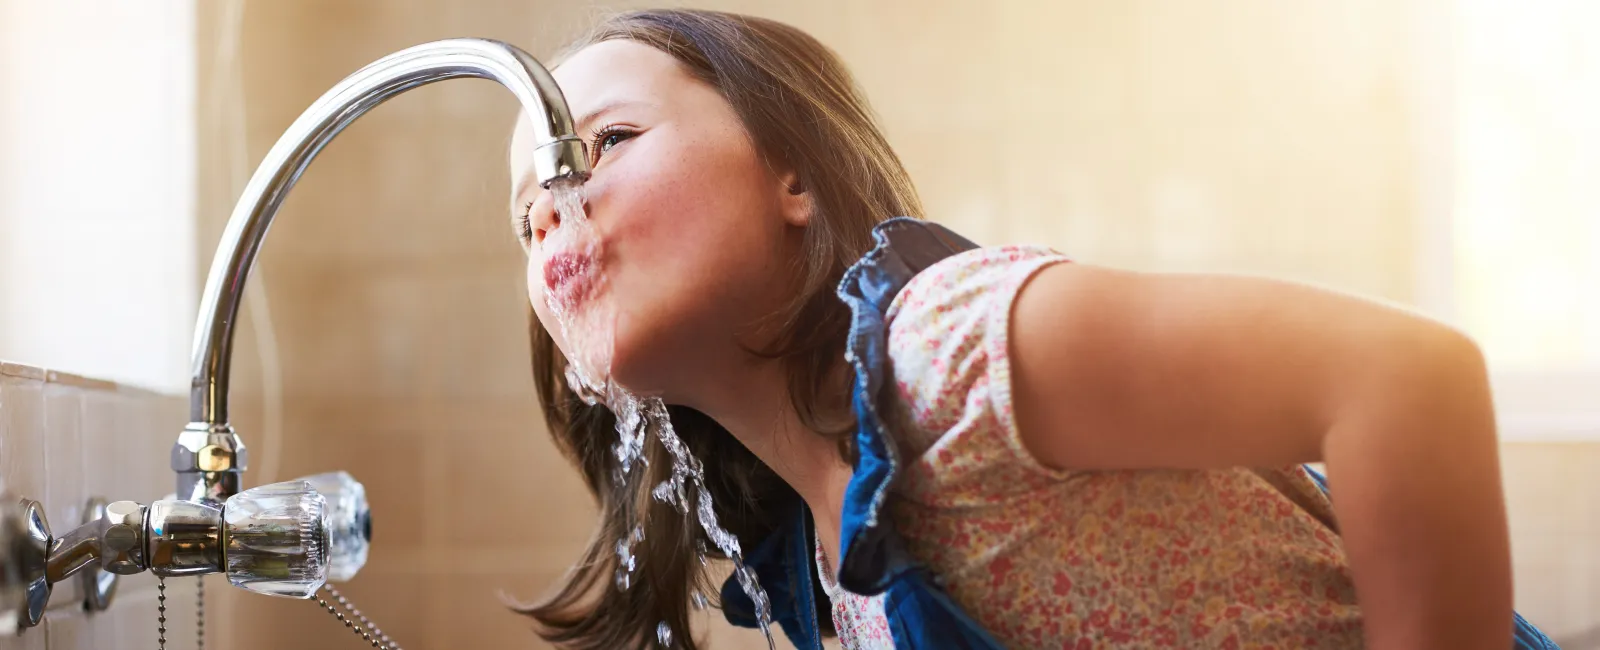 child drinking water from faucet